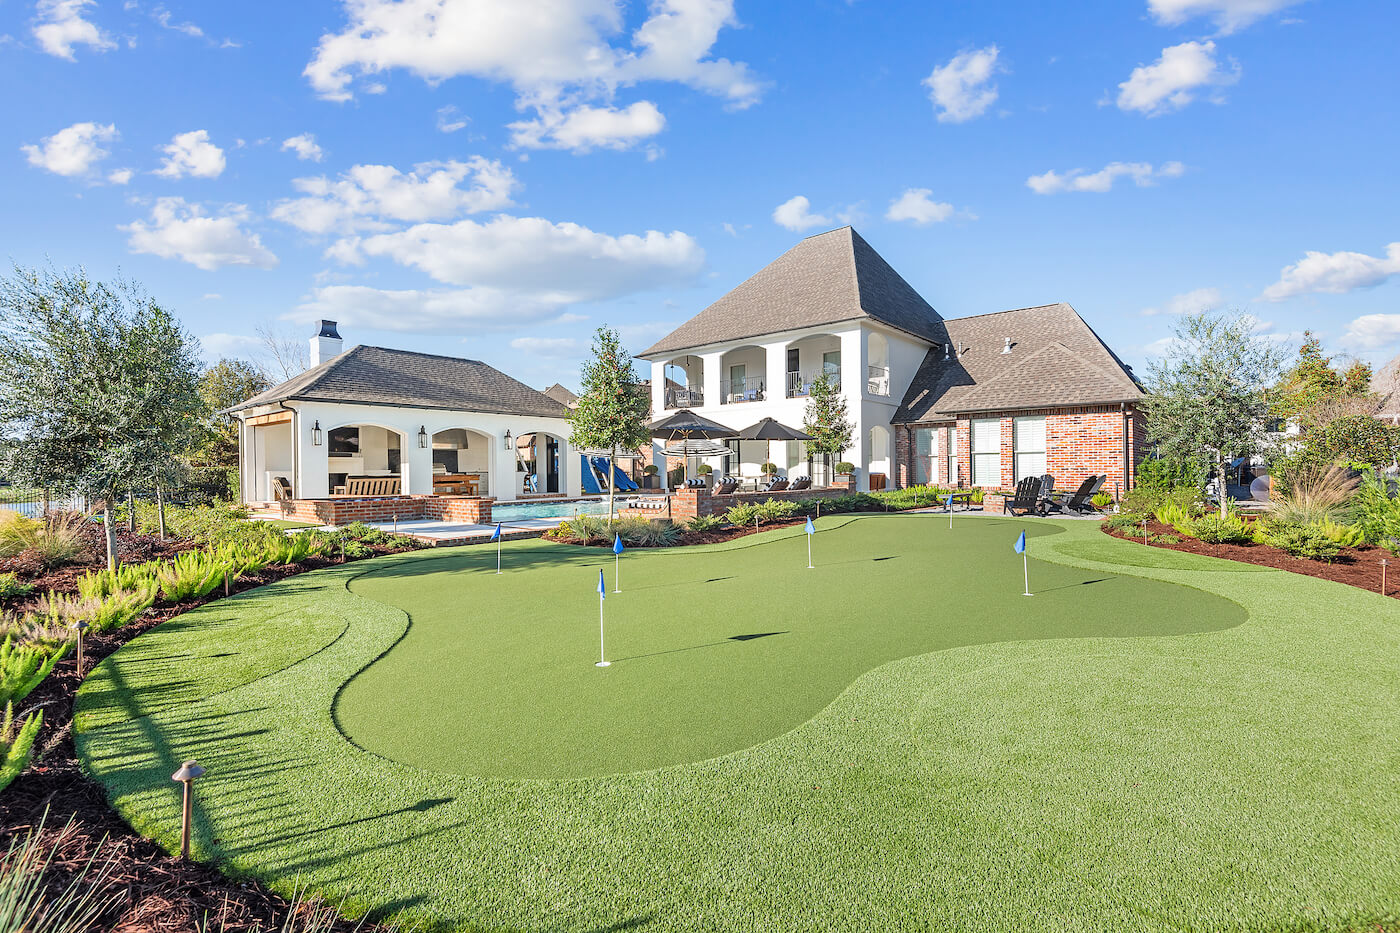 Landscape Design Baton Rouge LA - An image of a outdoor landscape design by Square One Landscape Group, showcasing the exterior of a home and a home "putting green".